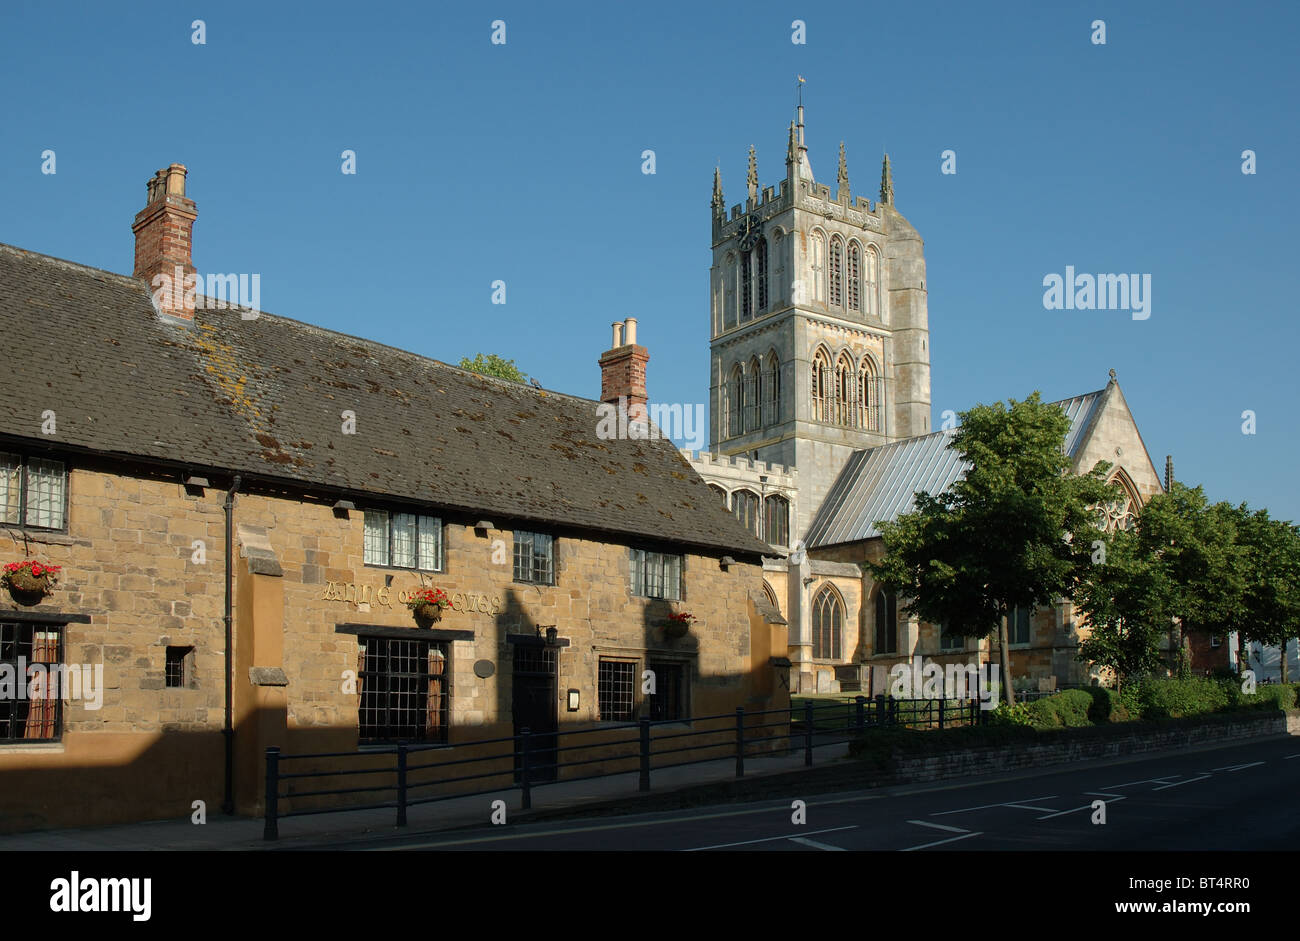 Anne of Cleves public house and St Marys church, Burton Street, Melton Mowbray, Leicestershire, England, UK Stock Photo